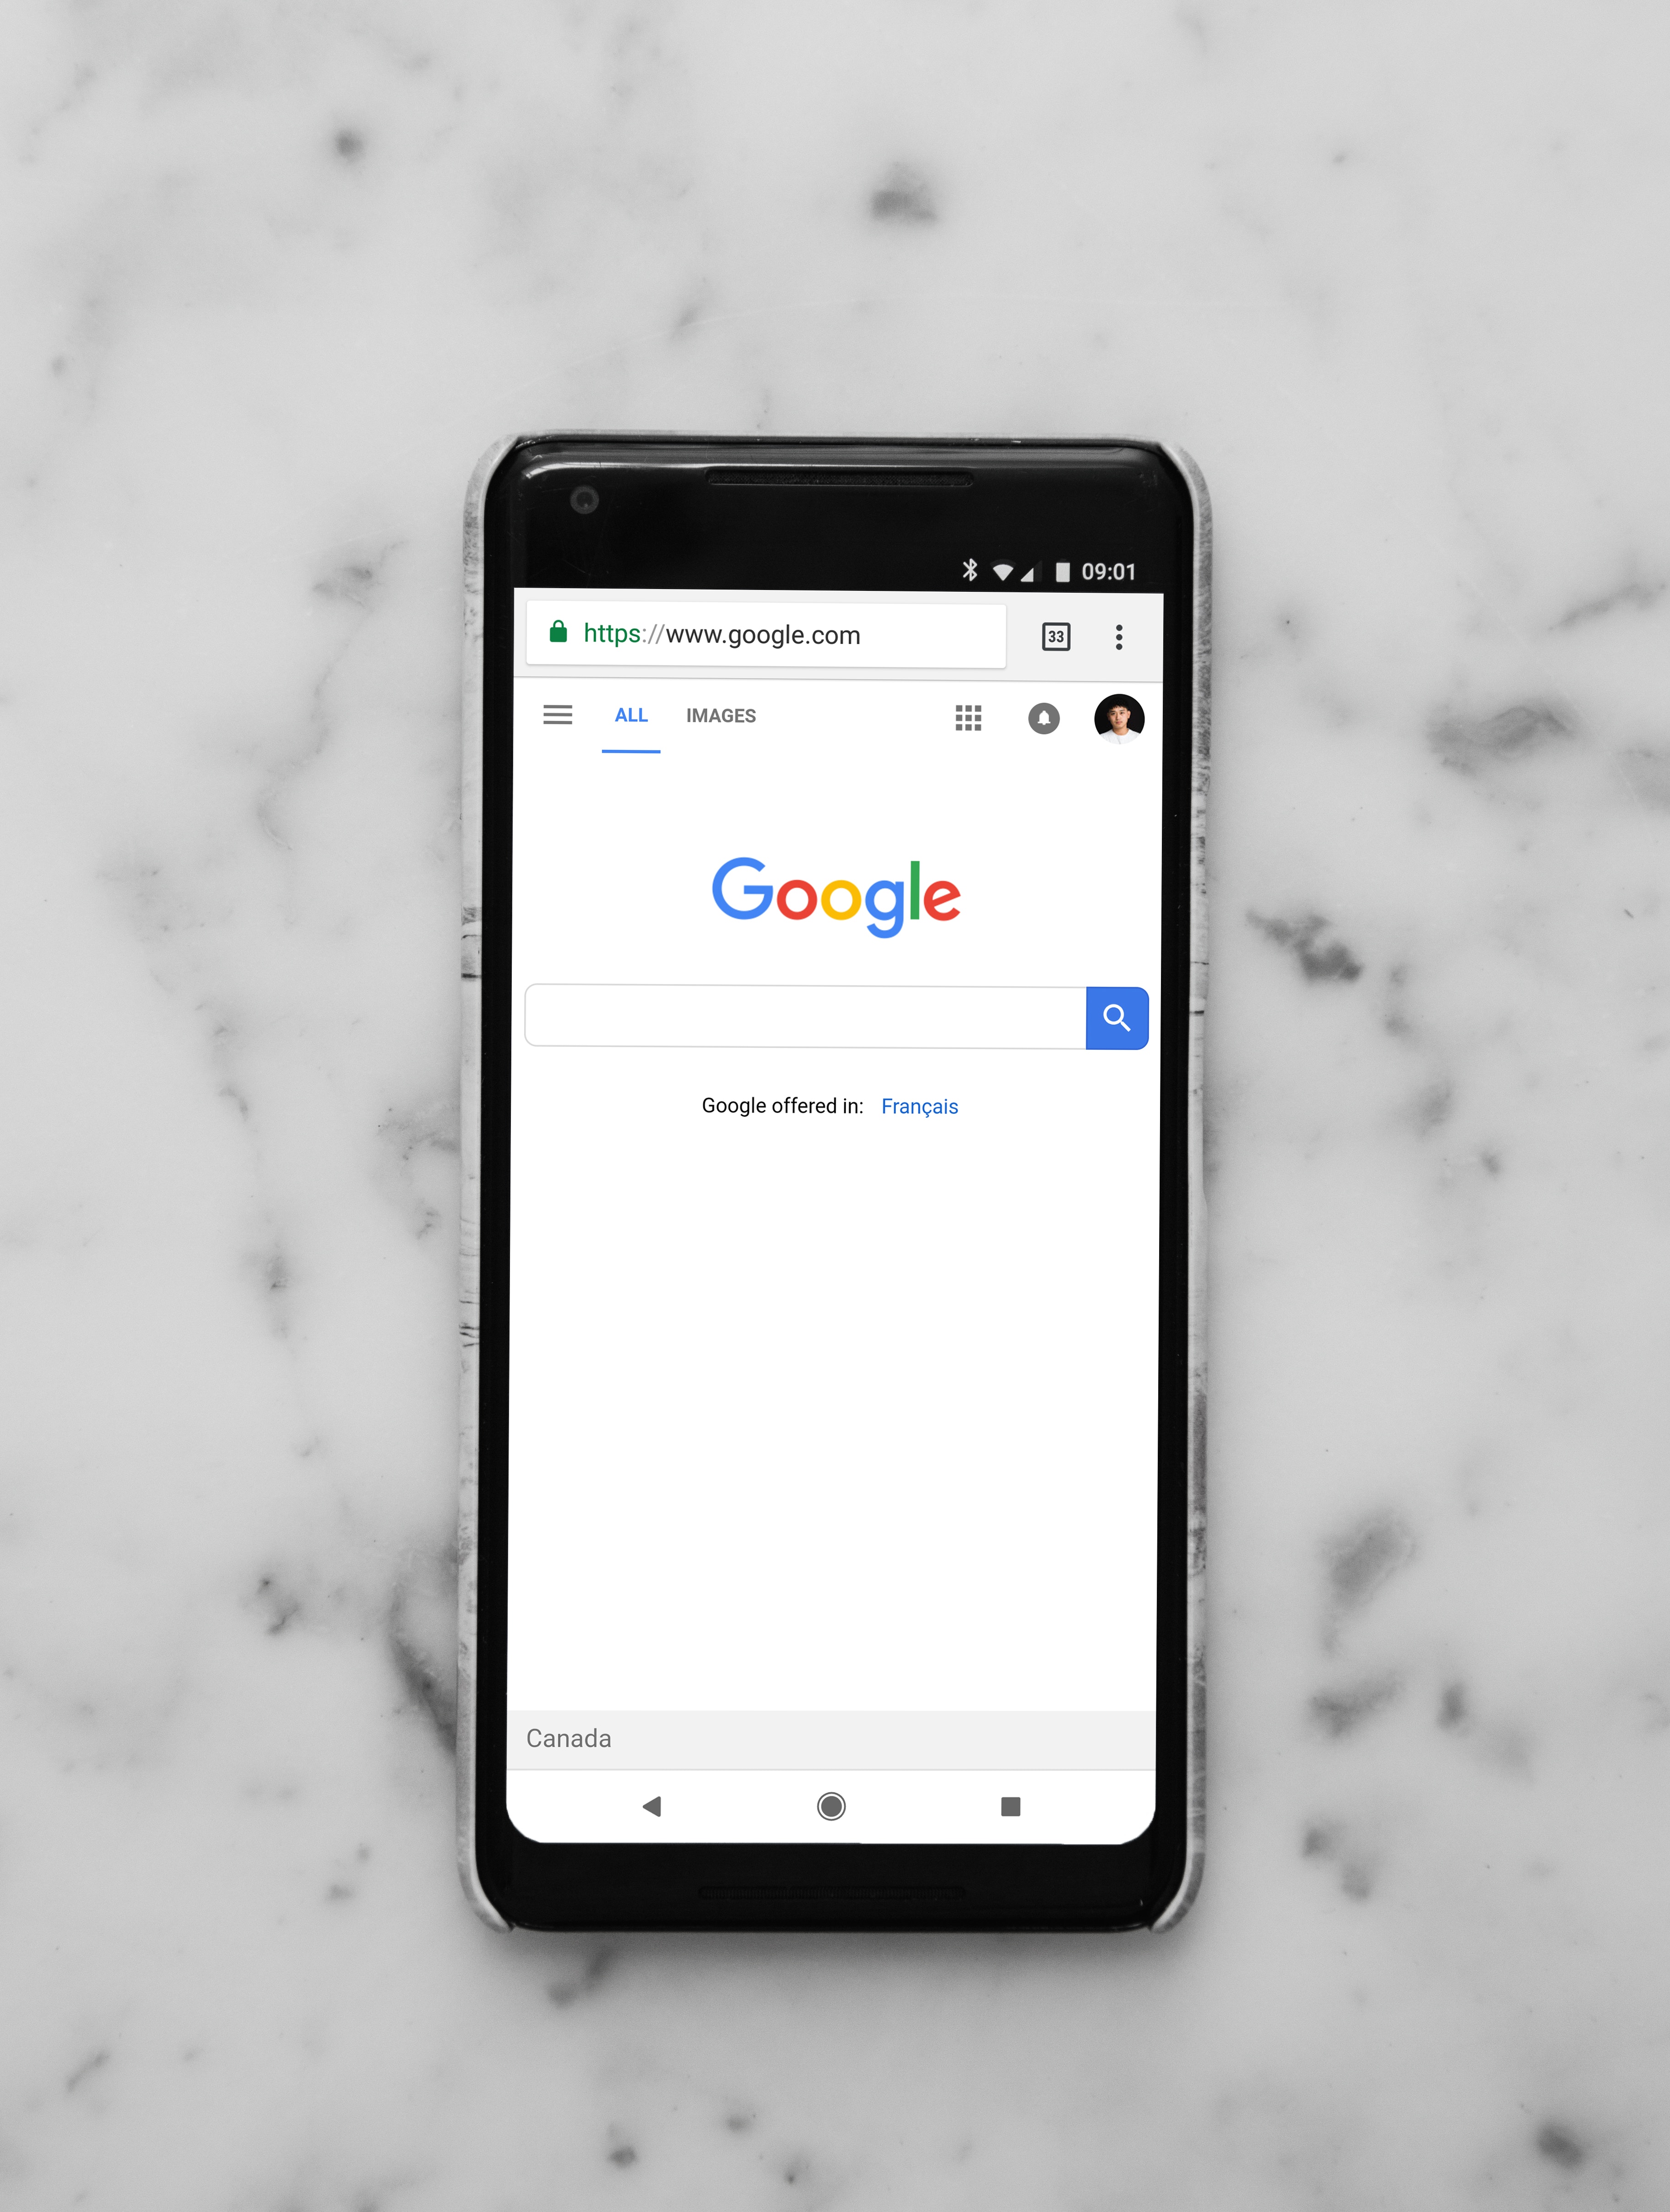 A phone opened to Google.